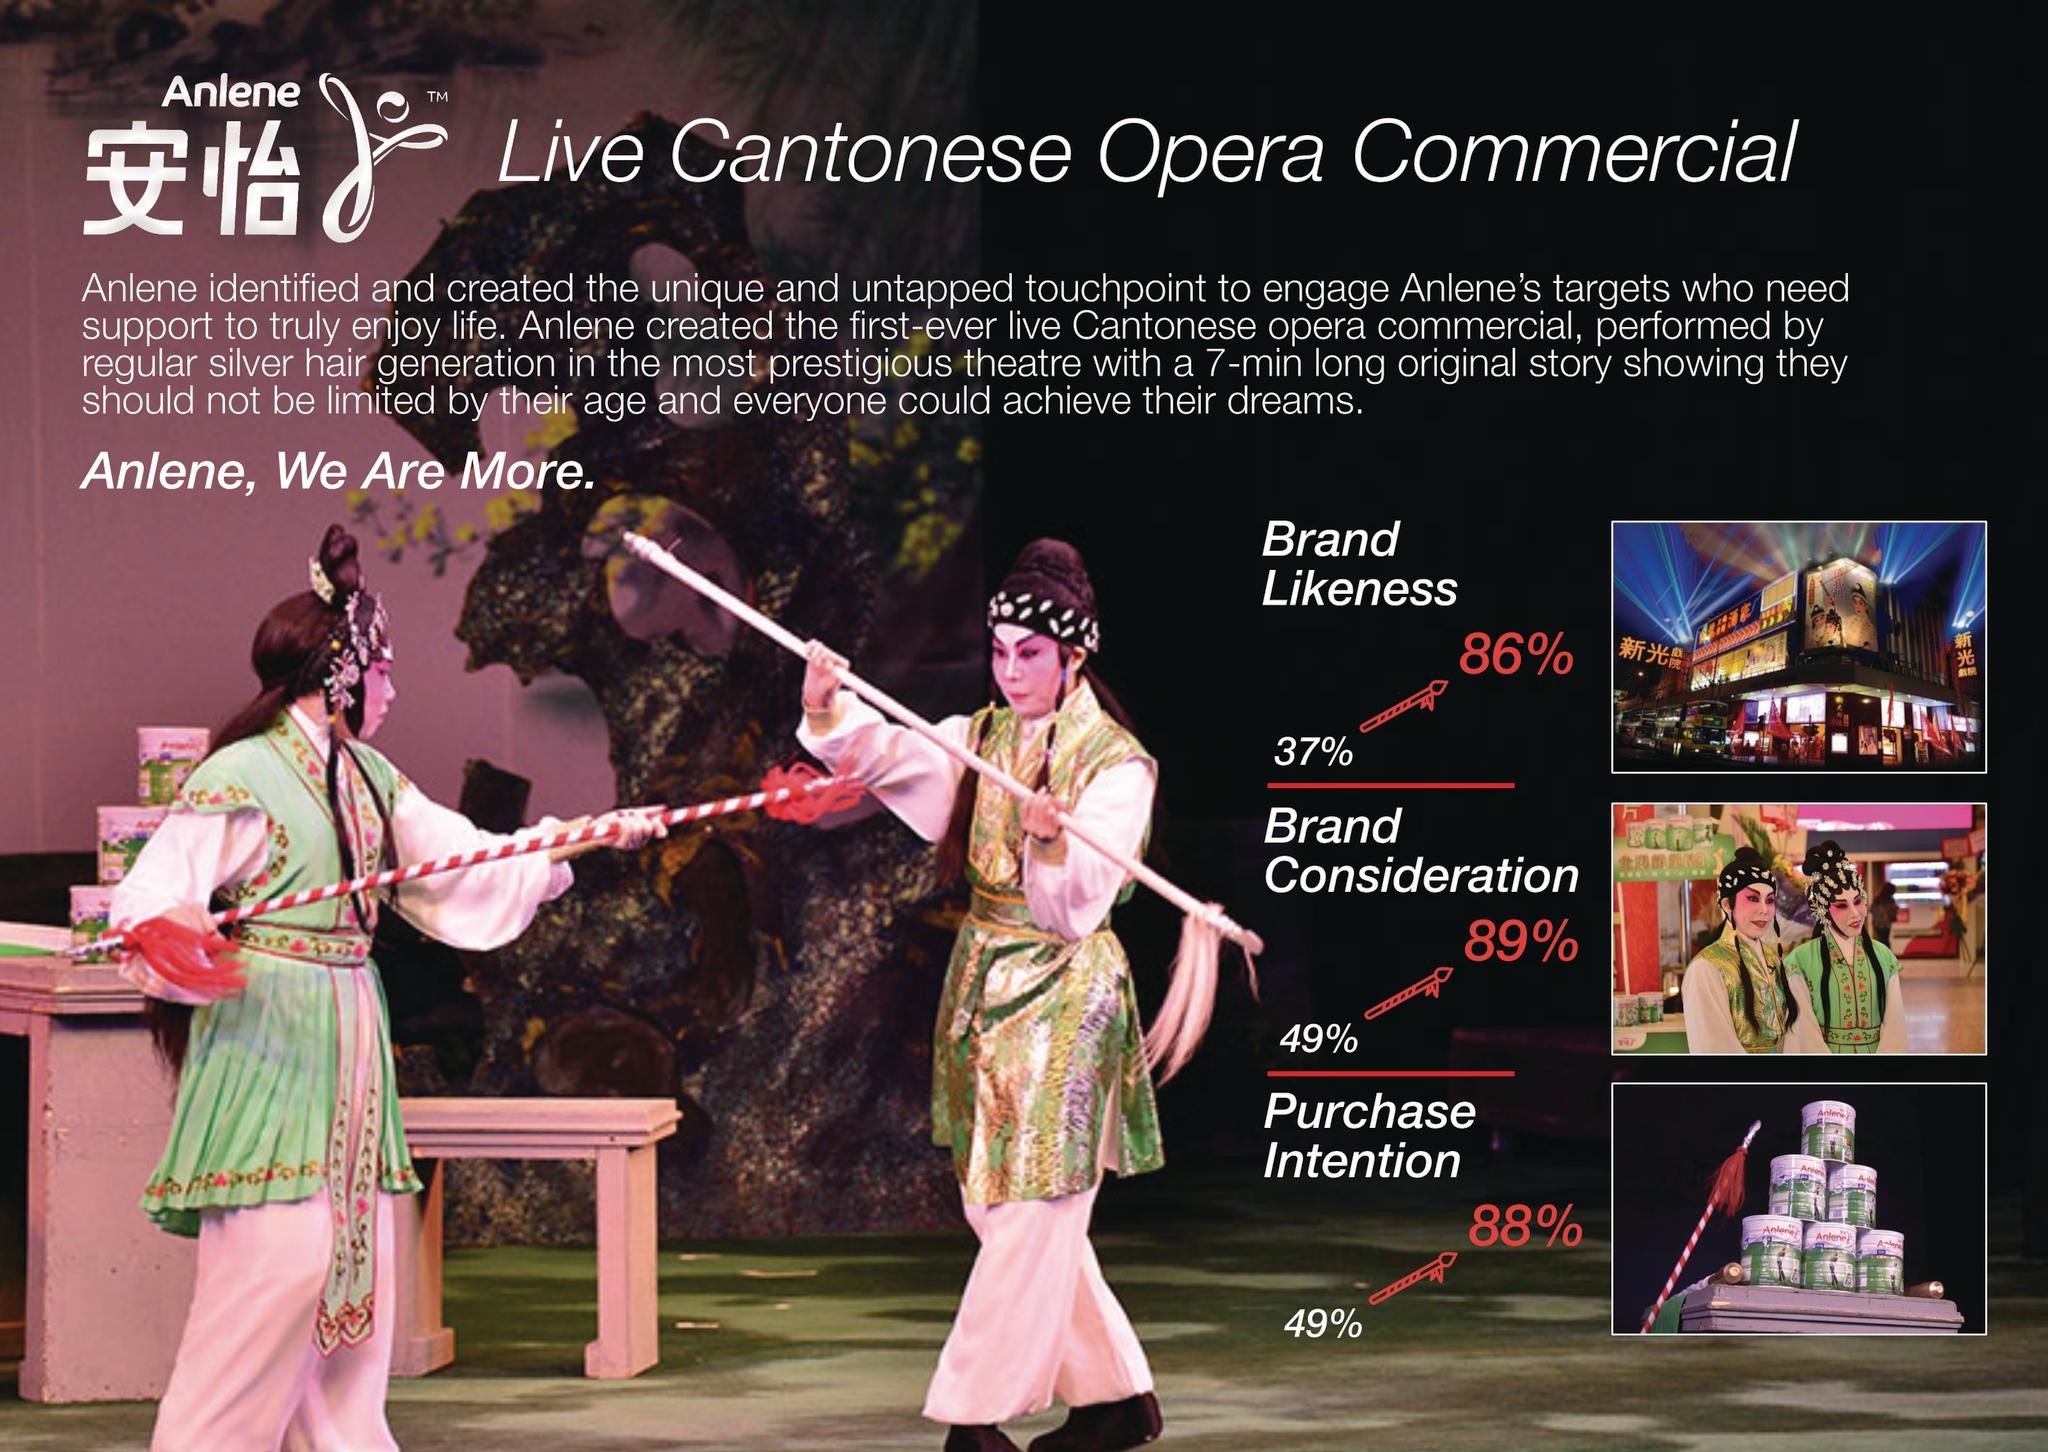 Live Cantonese Opera Commercial